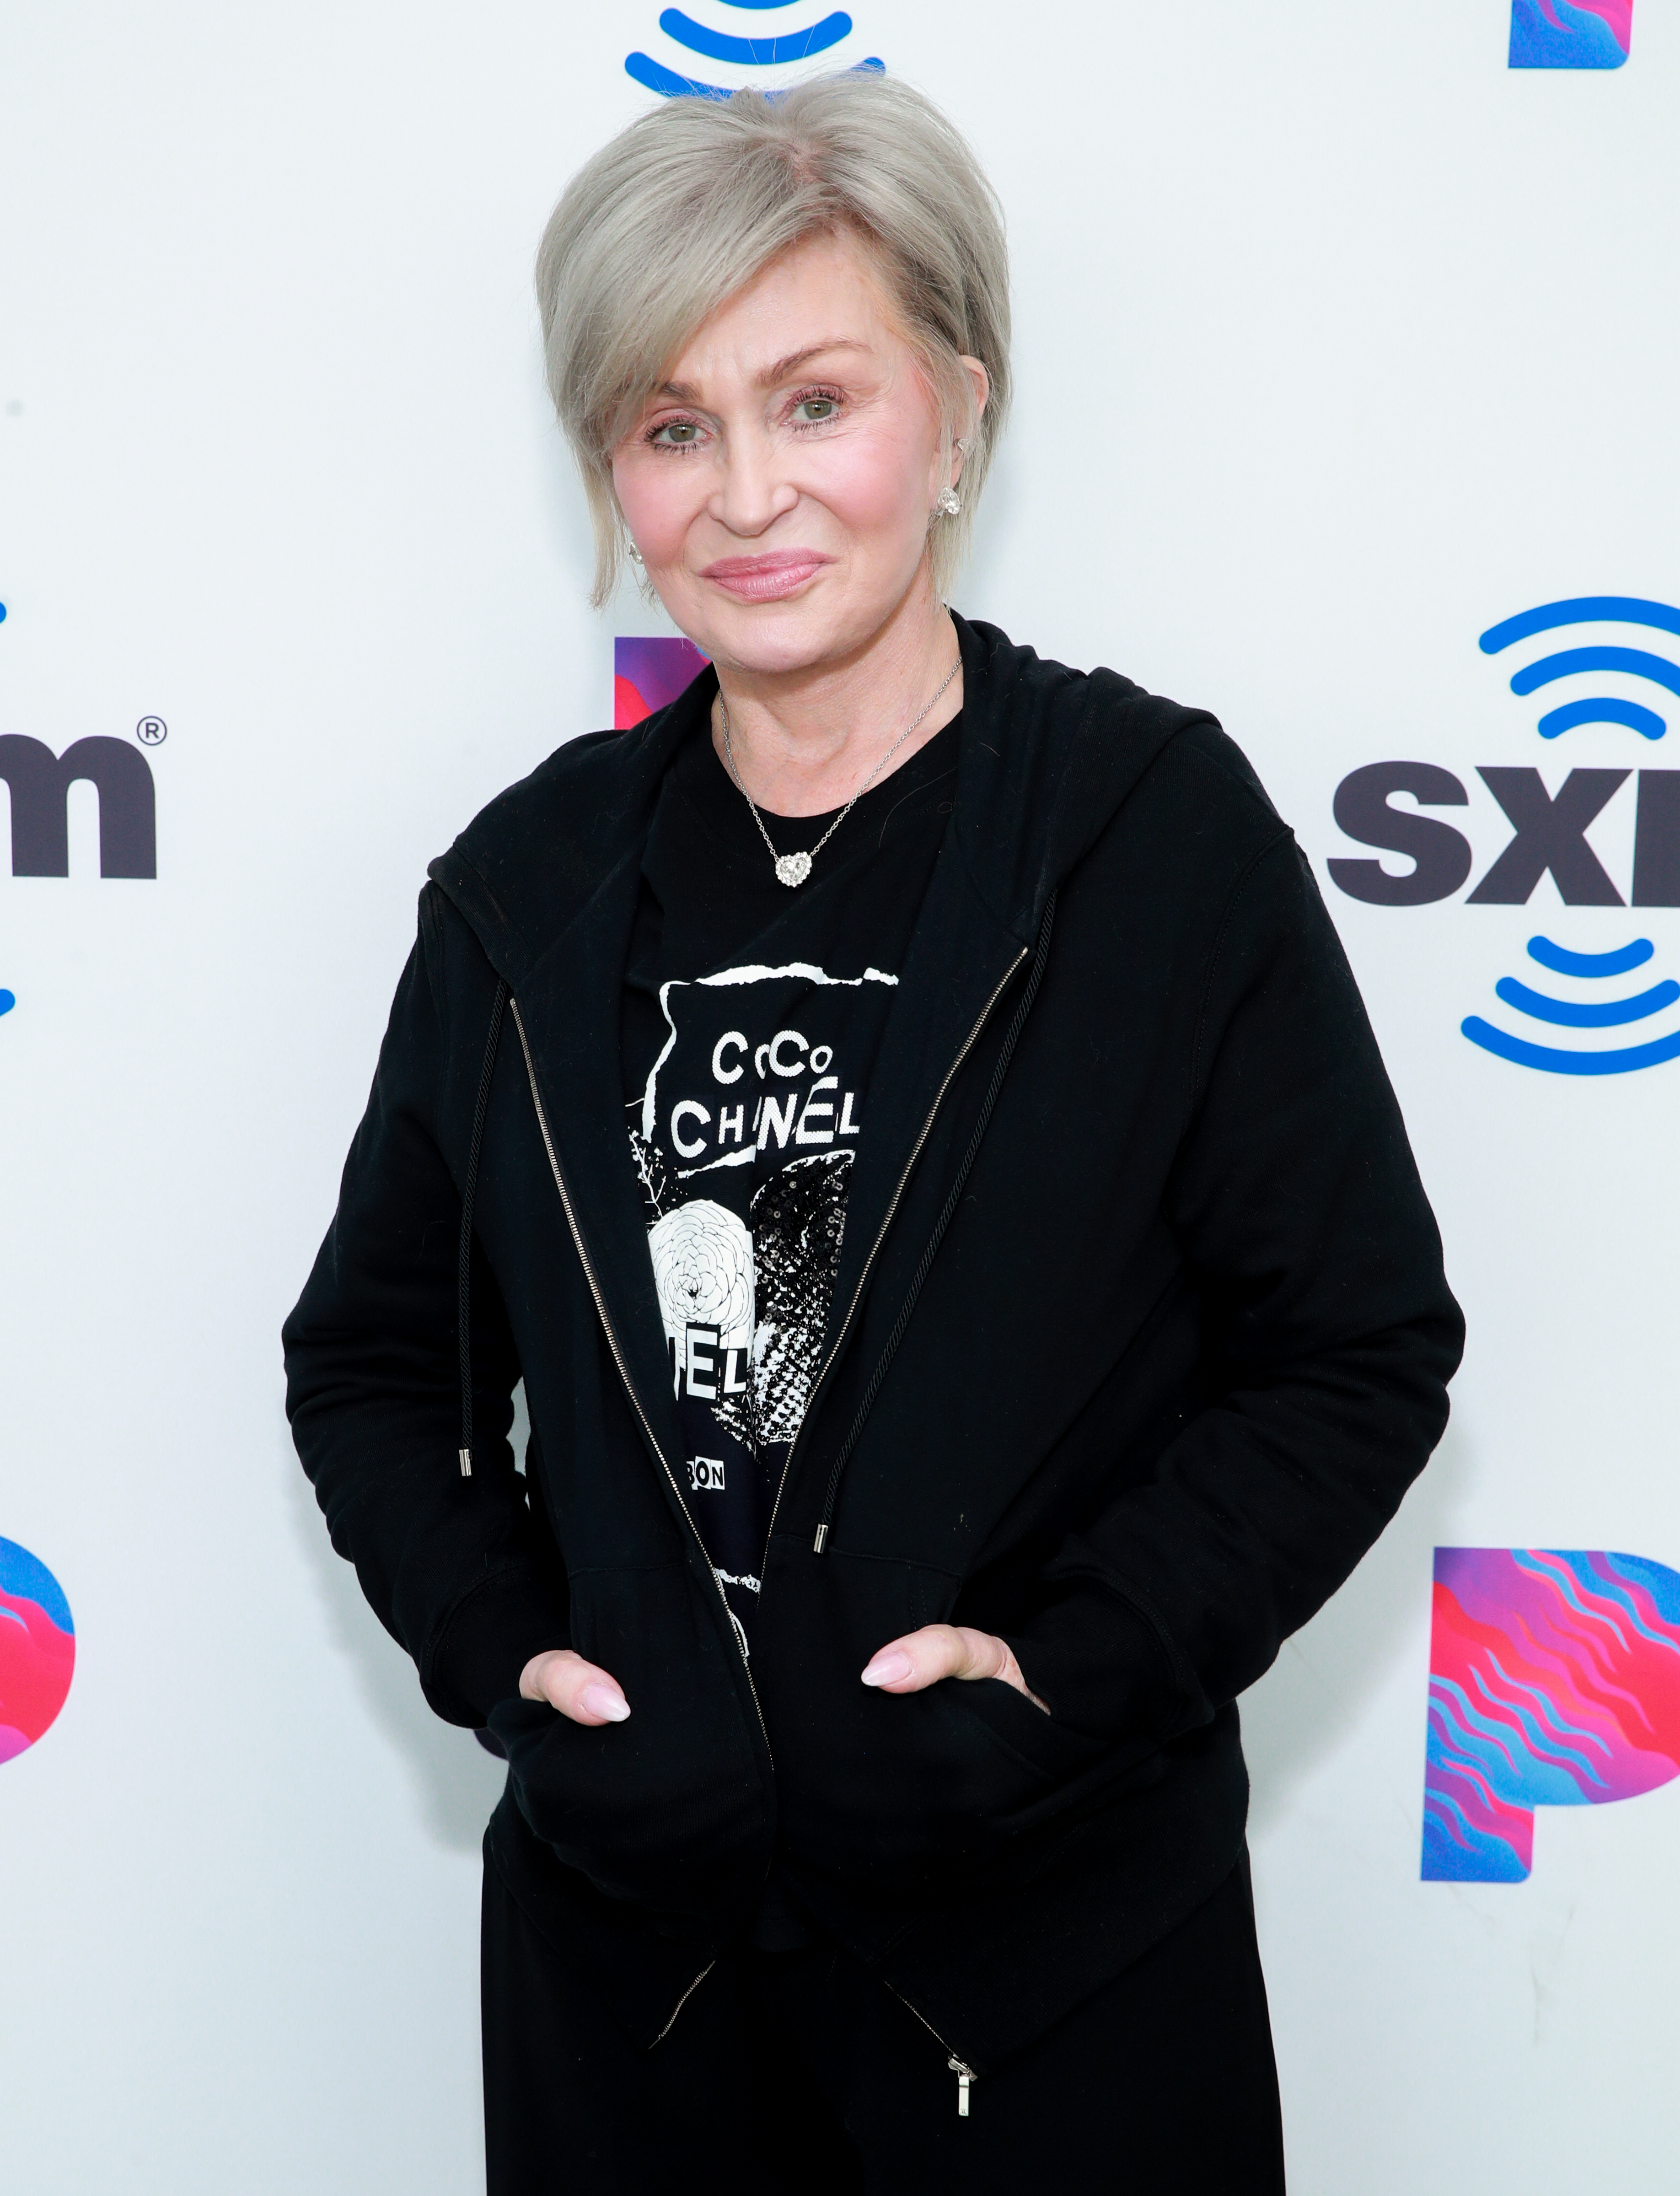 Sharon Osbourne visits the SiriusXM Hollywood Studio in Los Angeles, California on February 27, 2020 | Source: Getty Images